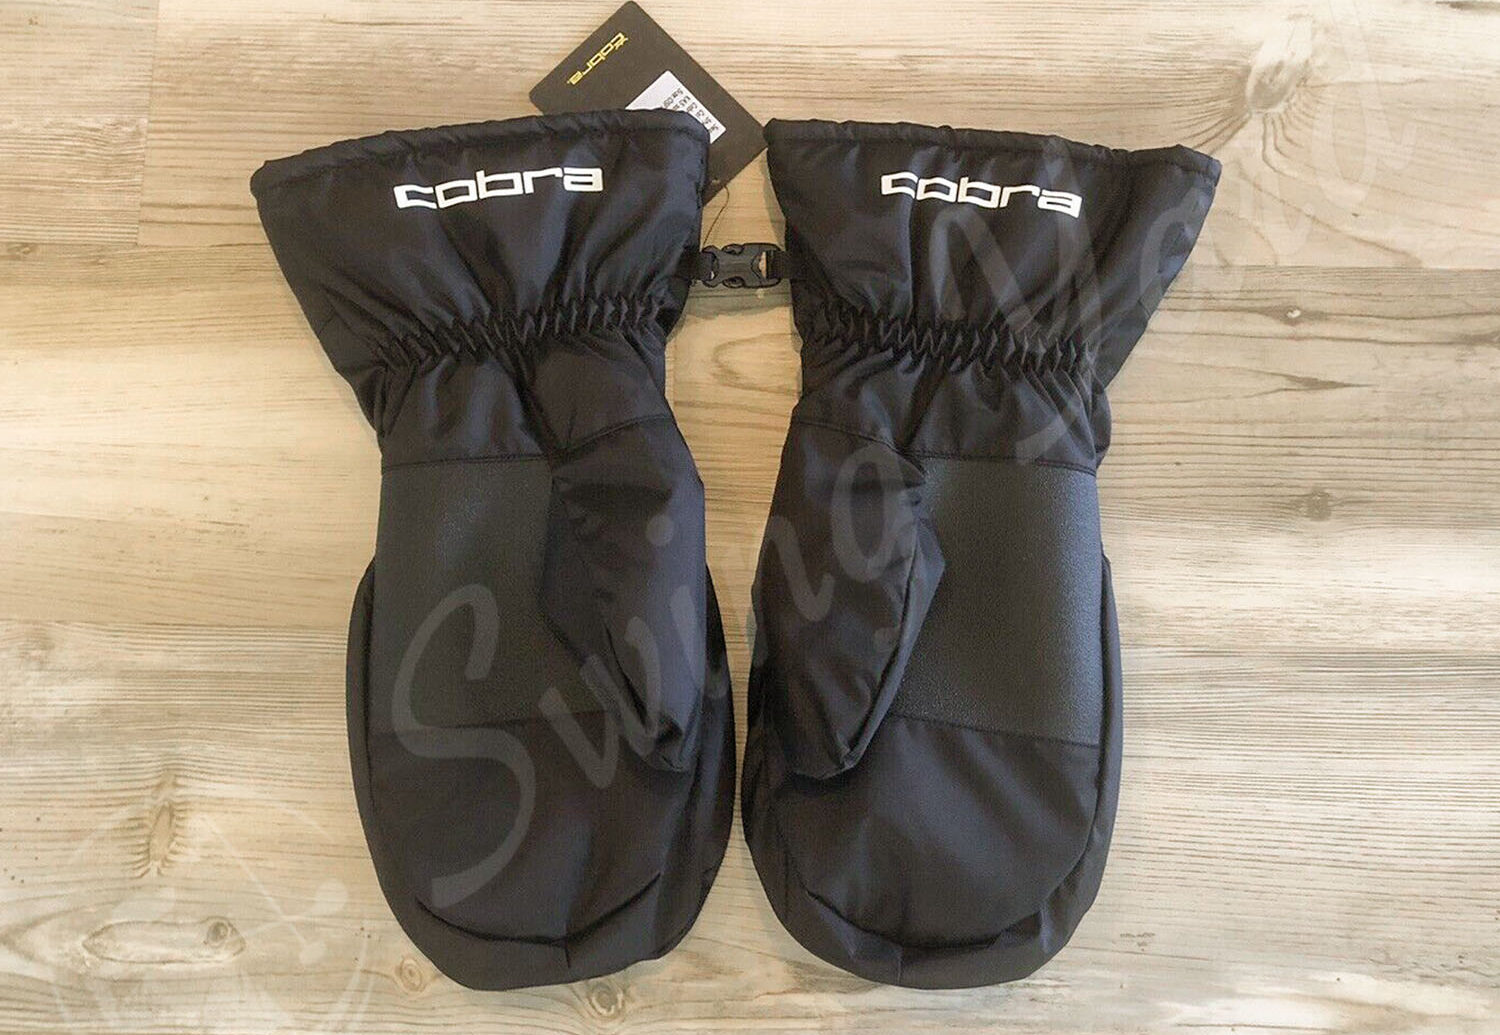 A backside view of Cobra golf winter mitts on the floor